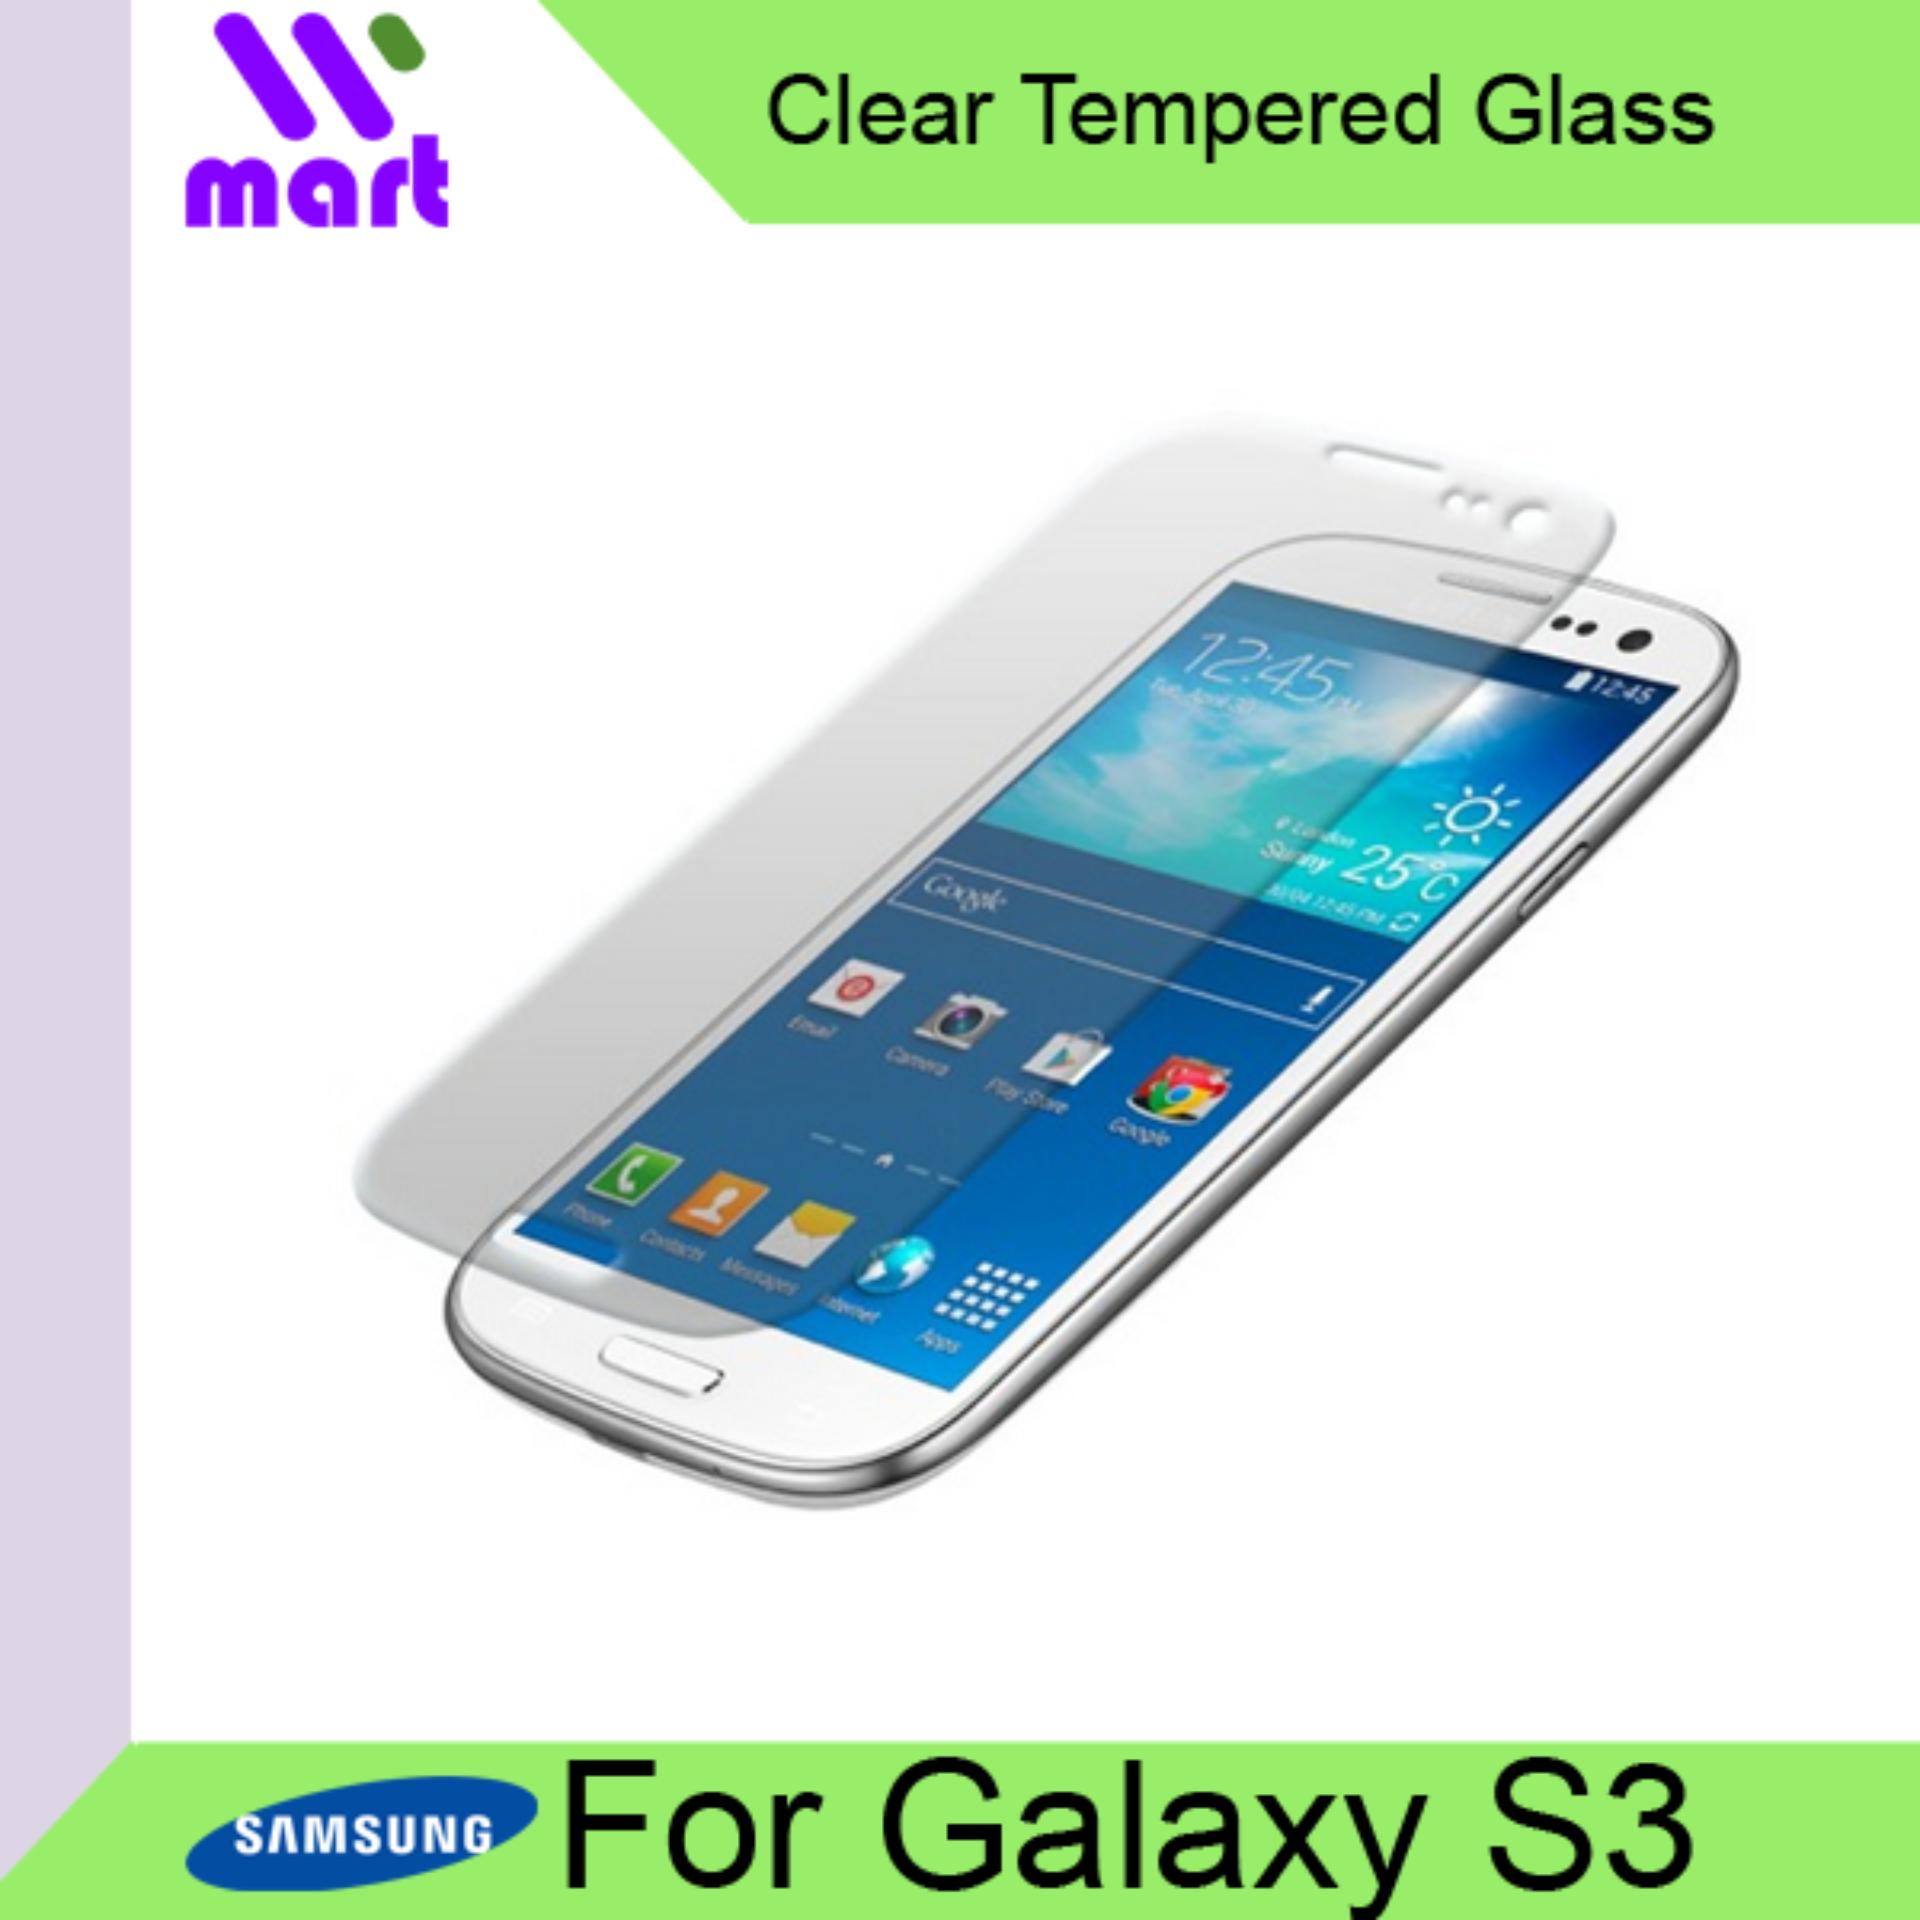 Tempered Glass Screen Protector (Clear) For Samsung Galaxy S3